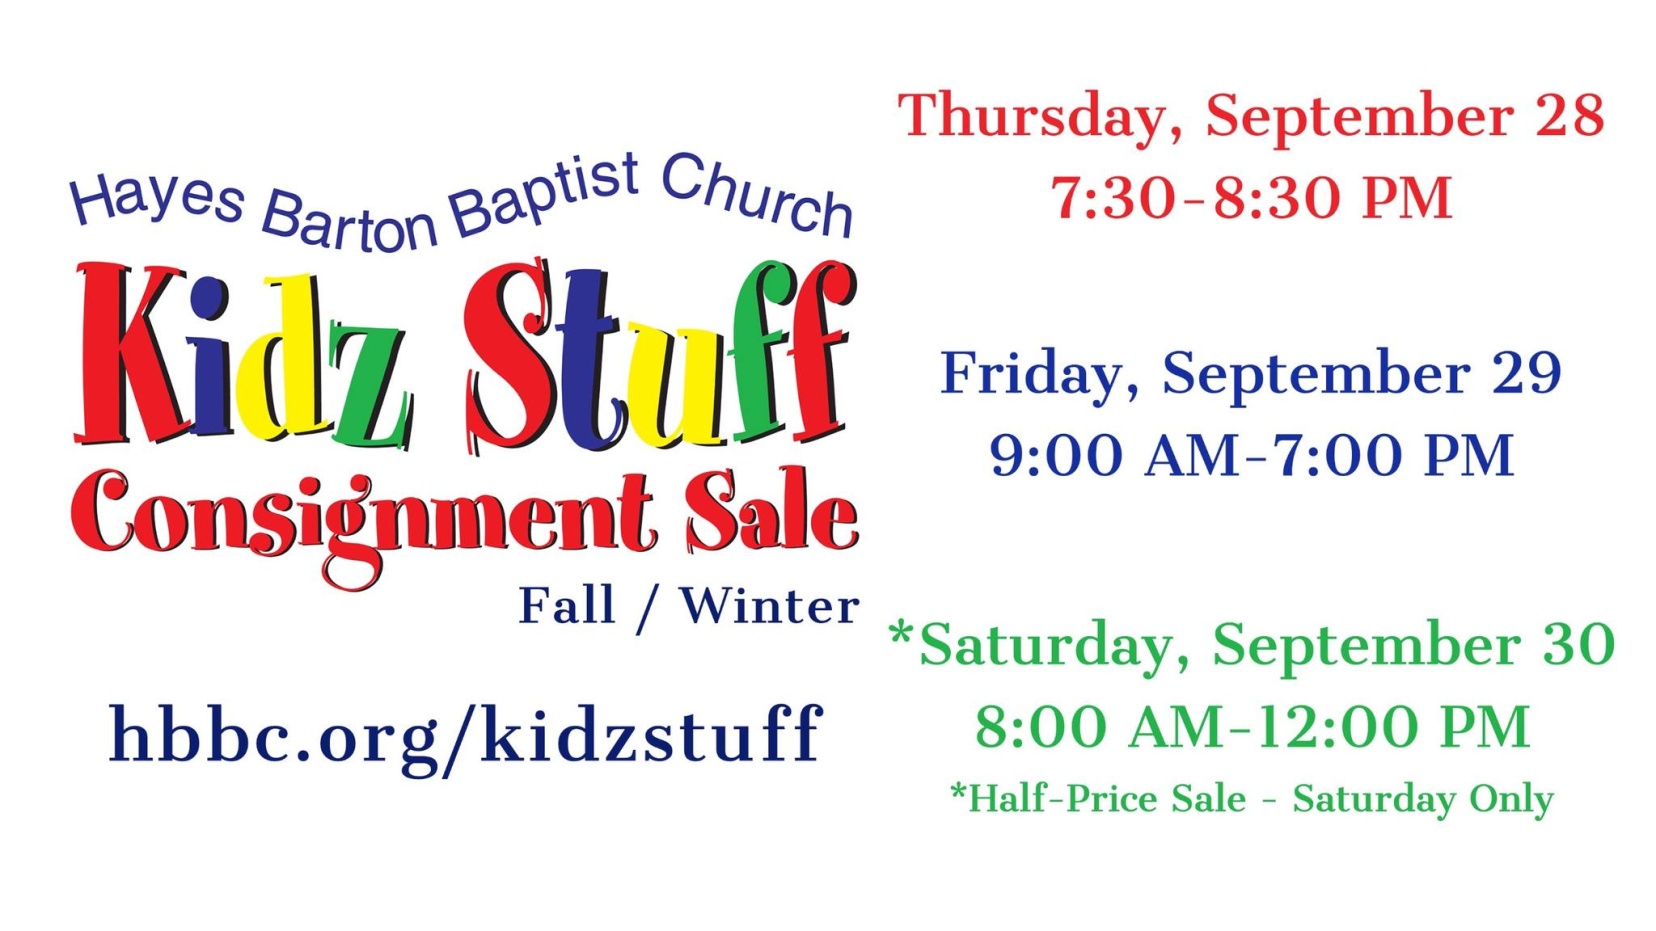 Kidz Stuff Fall and Winter Consignment Sale